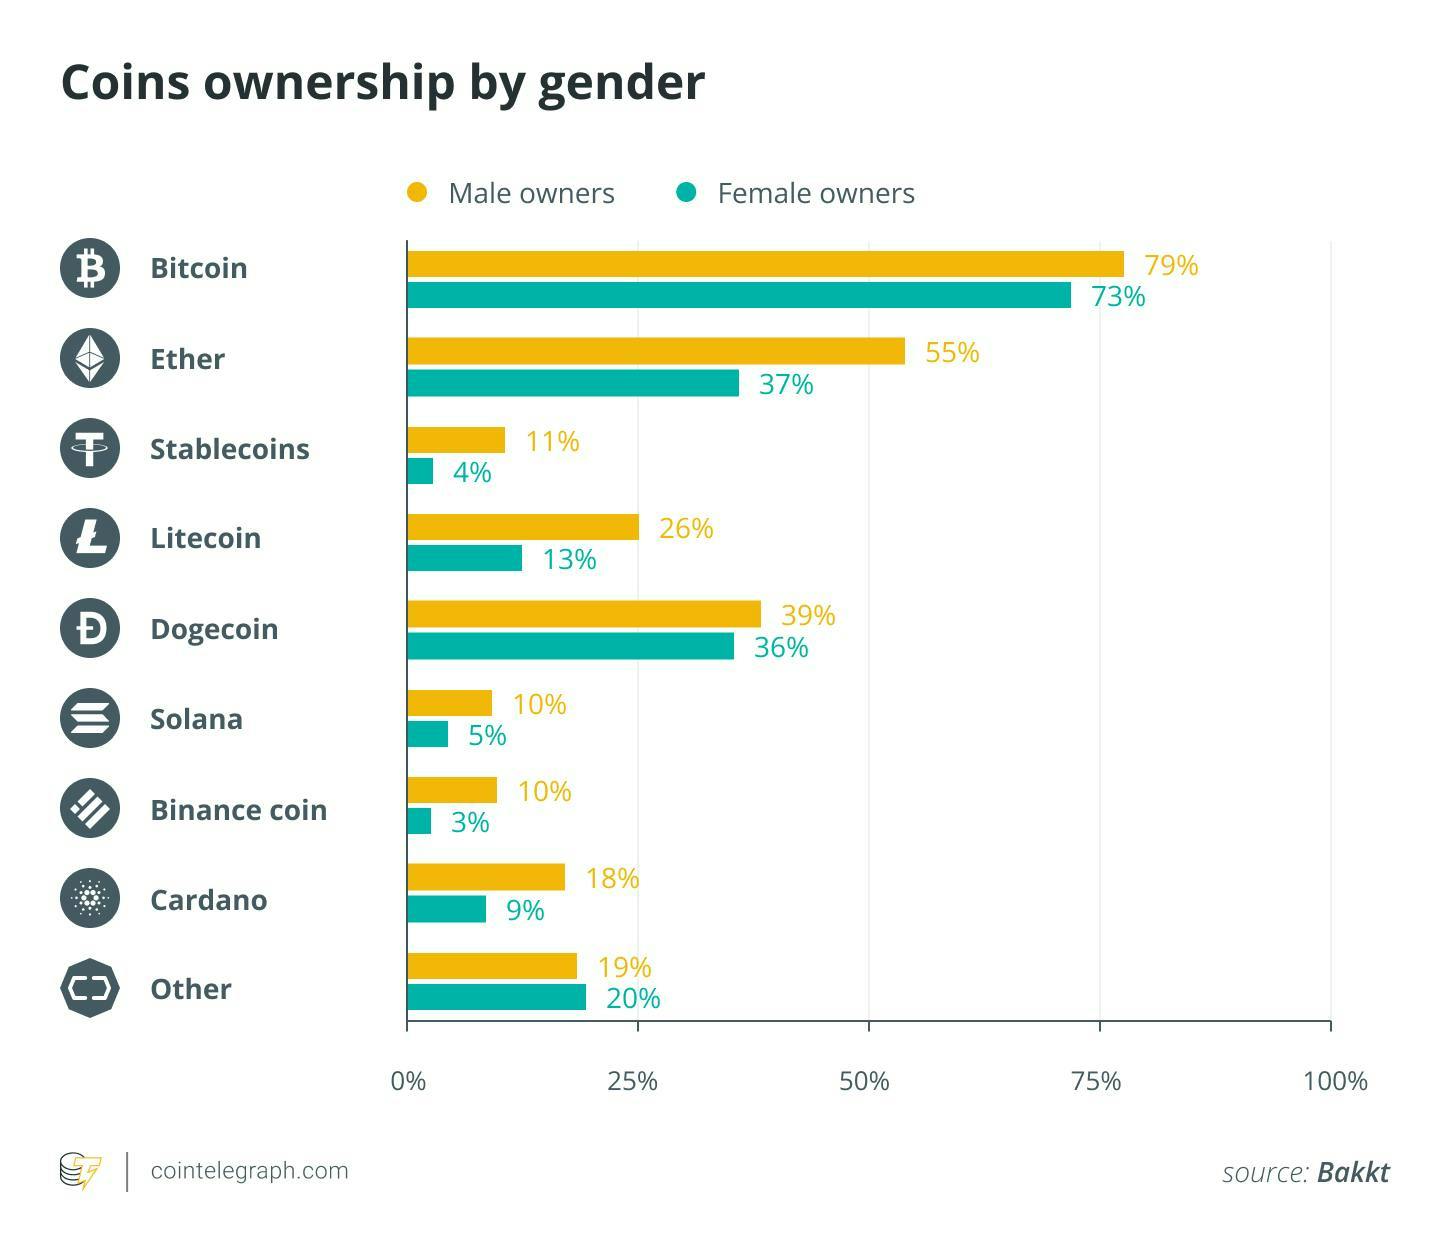 Coins ownership by gender